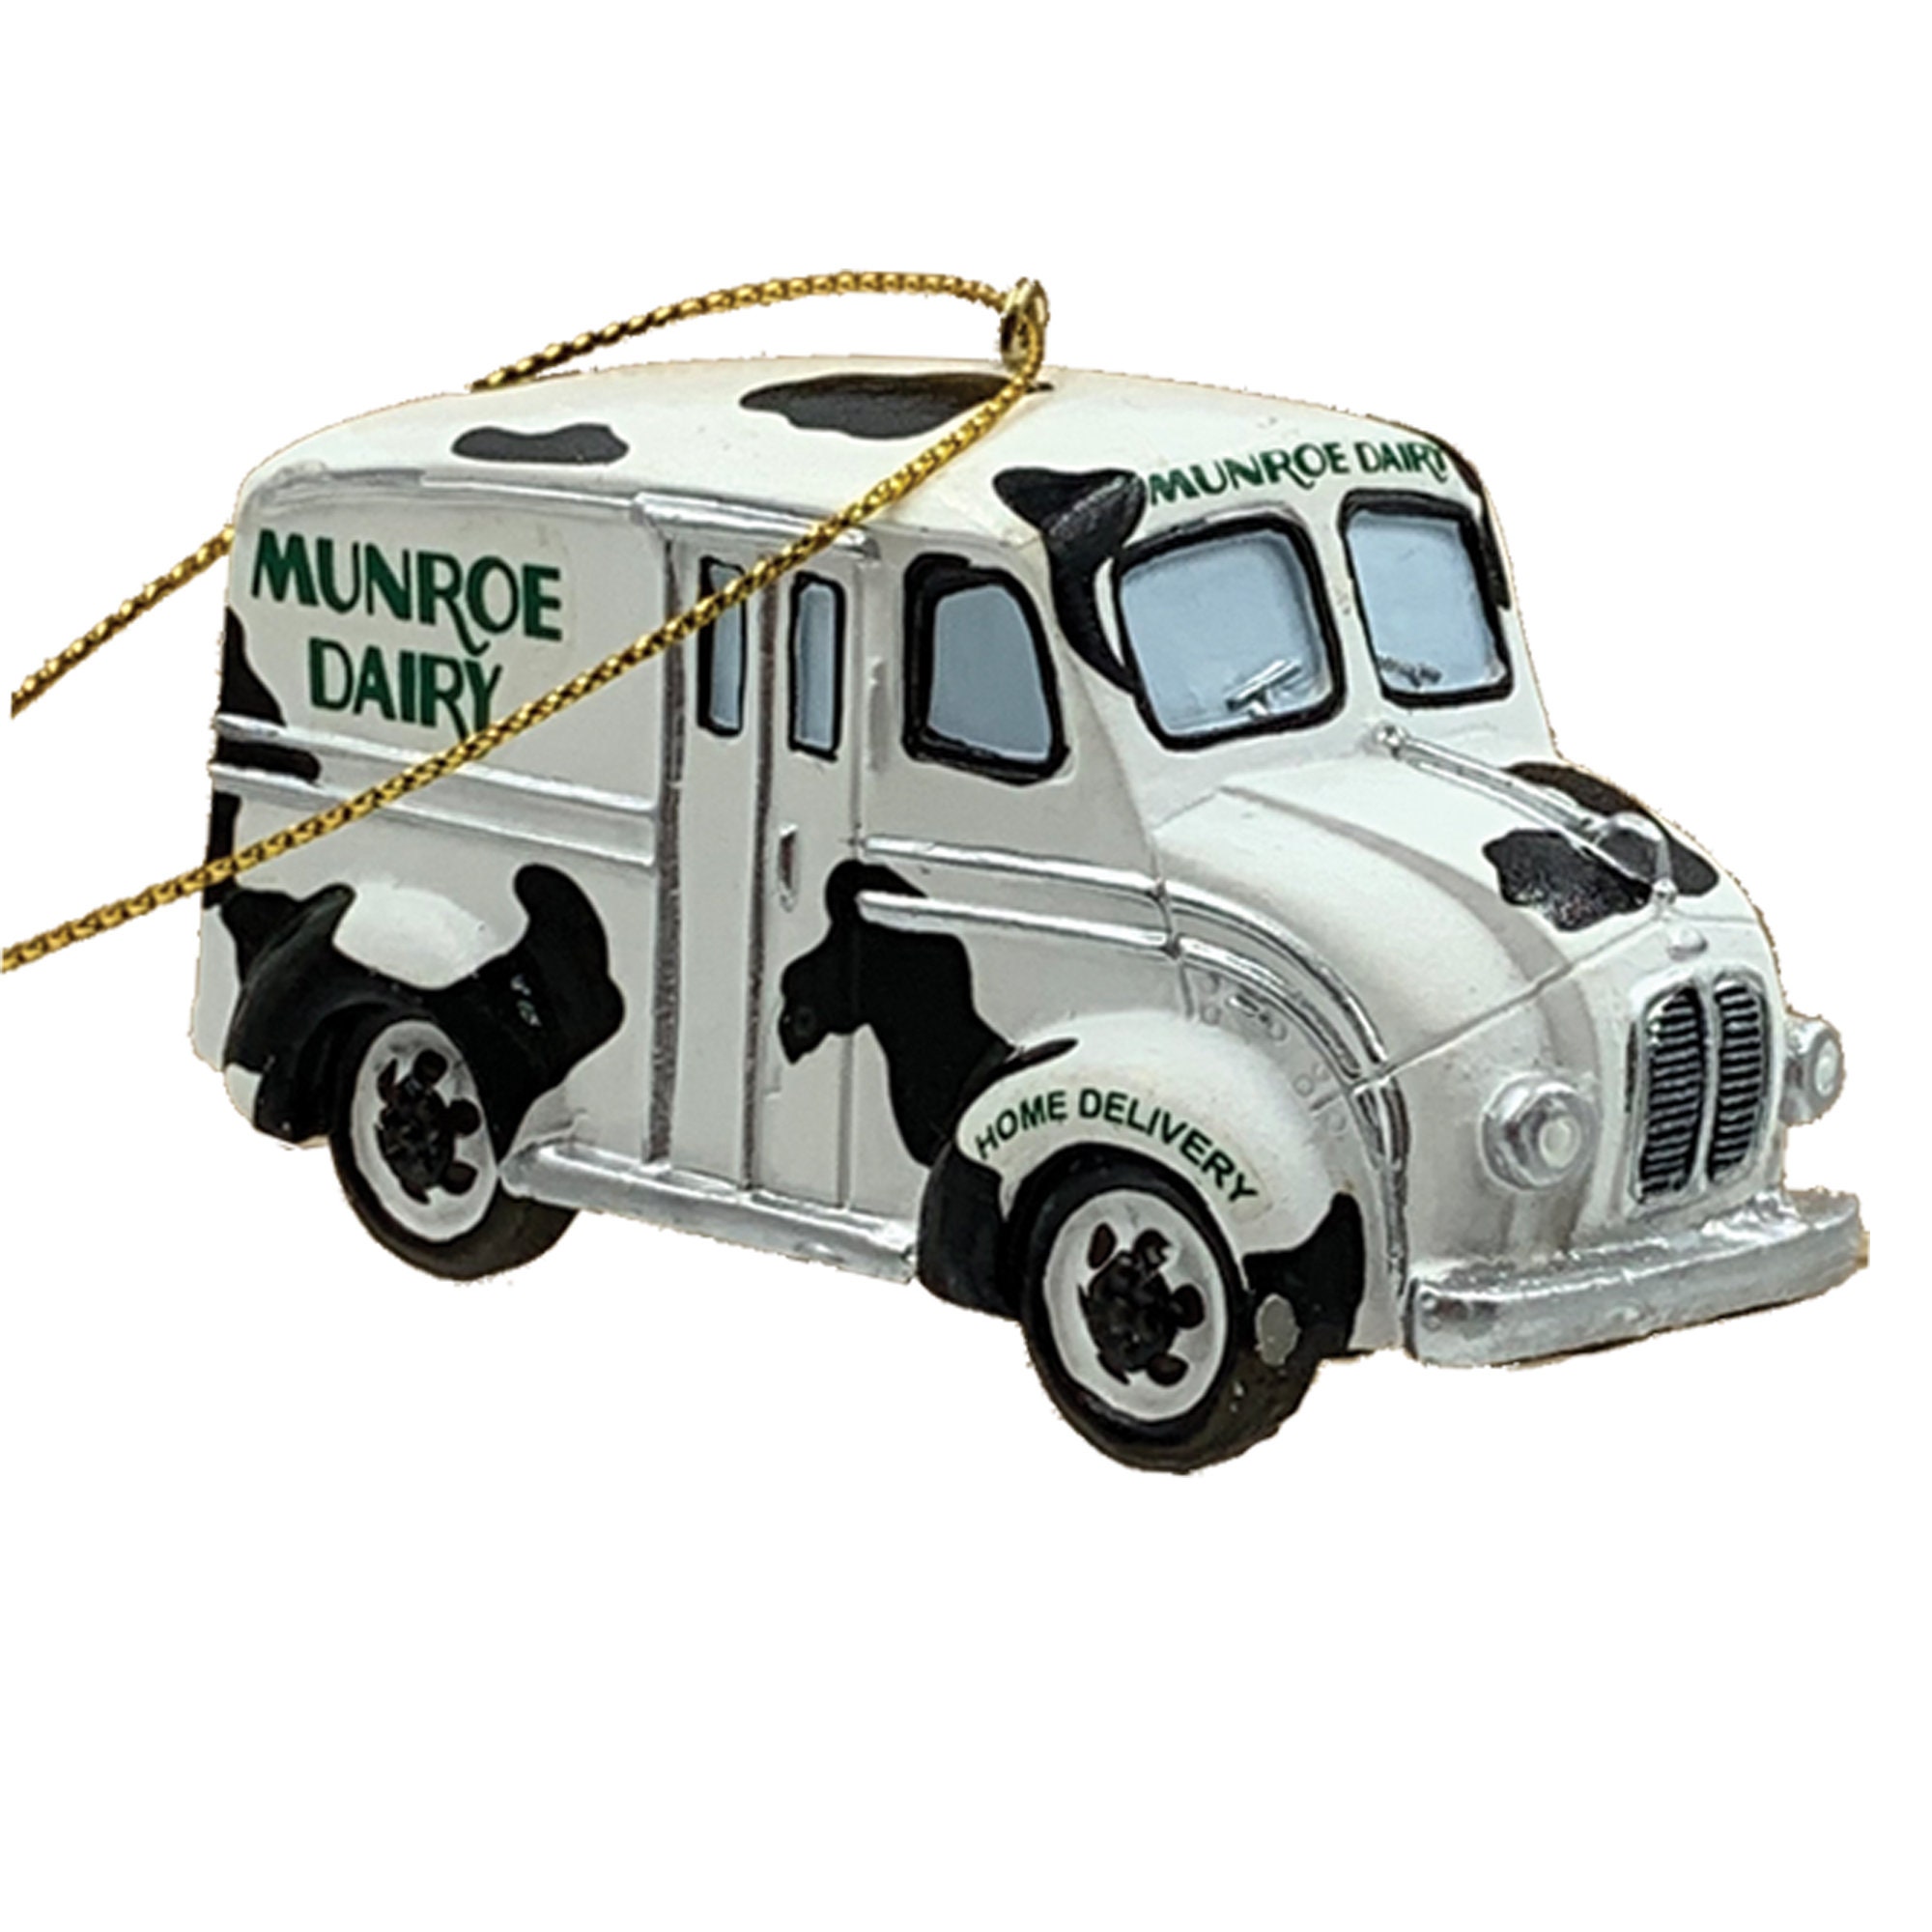 My Little Town Munroe Dairy Divco Truck Ornament Etsy